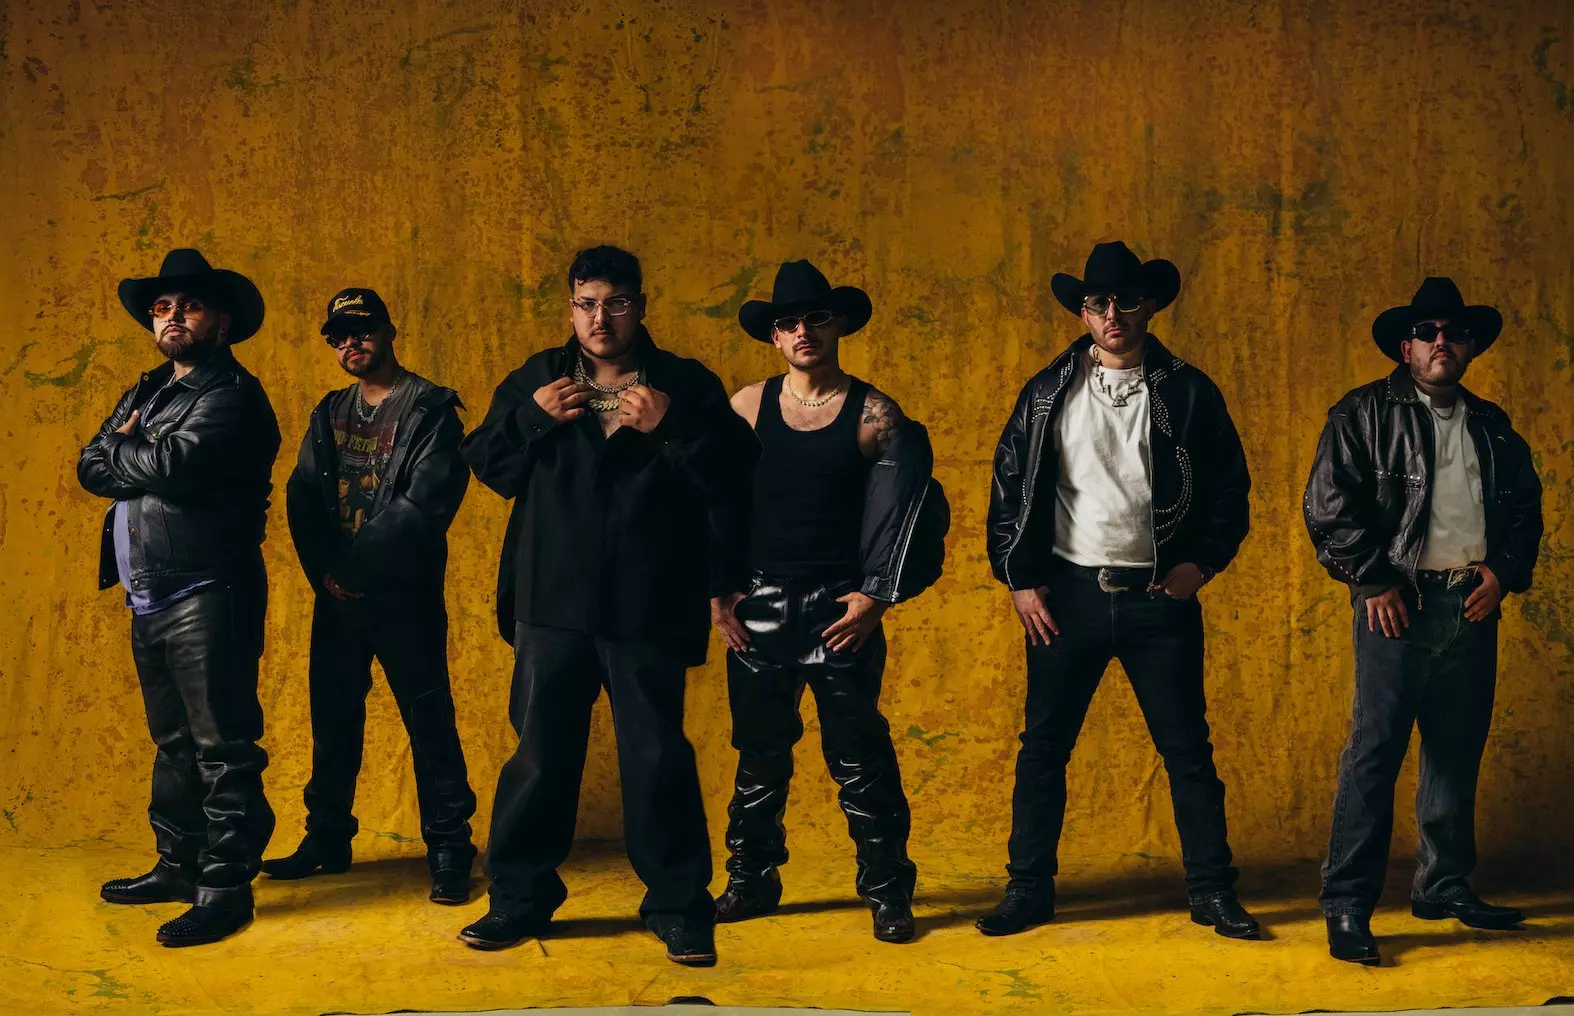 Grupo Frontera On 'Jugando A Que No Pasa Nada' & Fully Expressing Themselves: "This Album Was Made From The Heart"